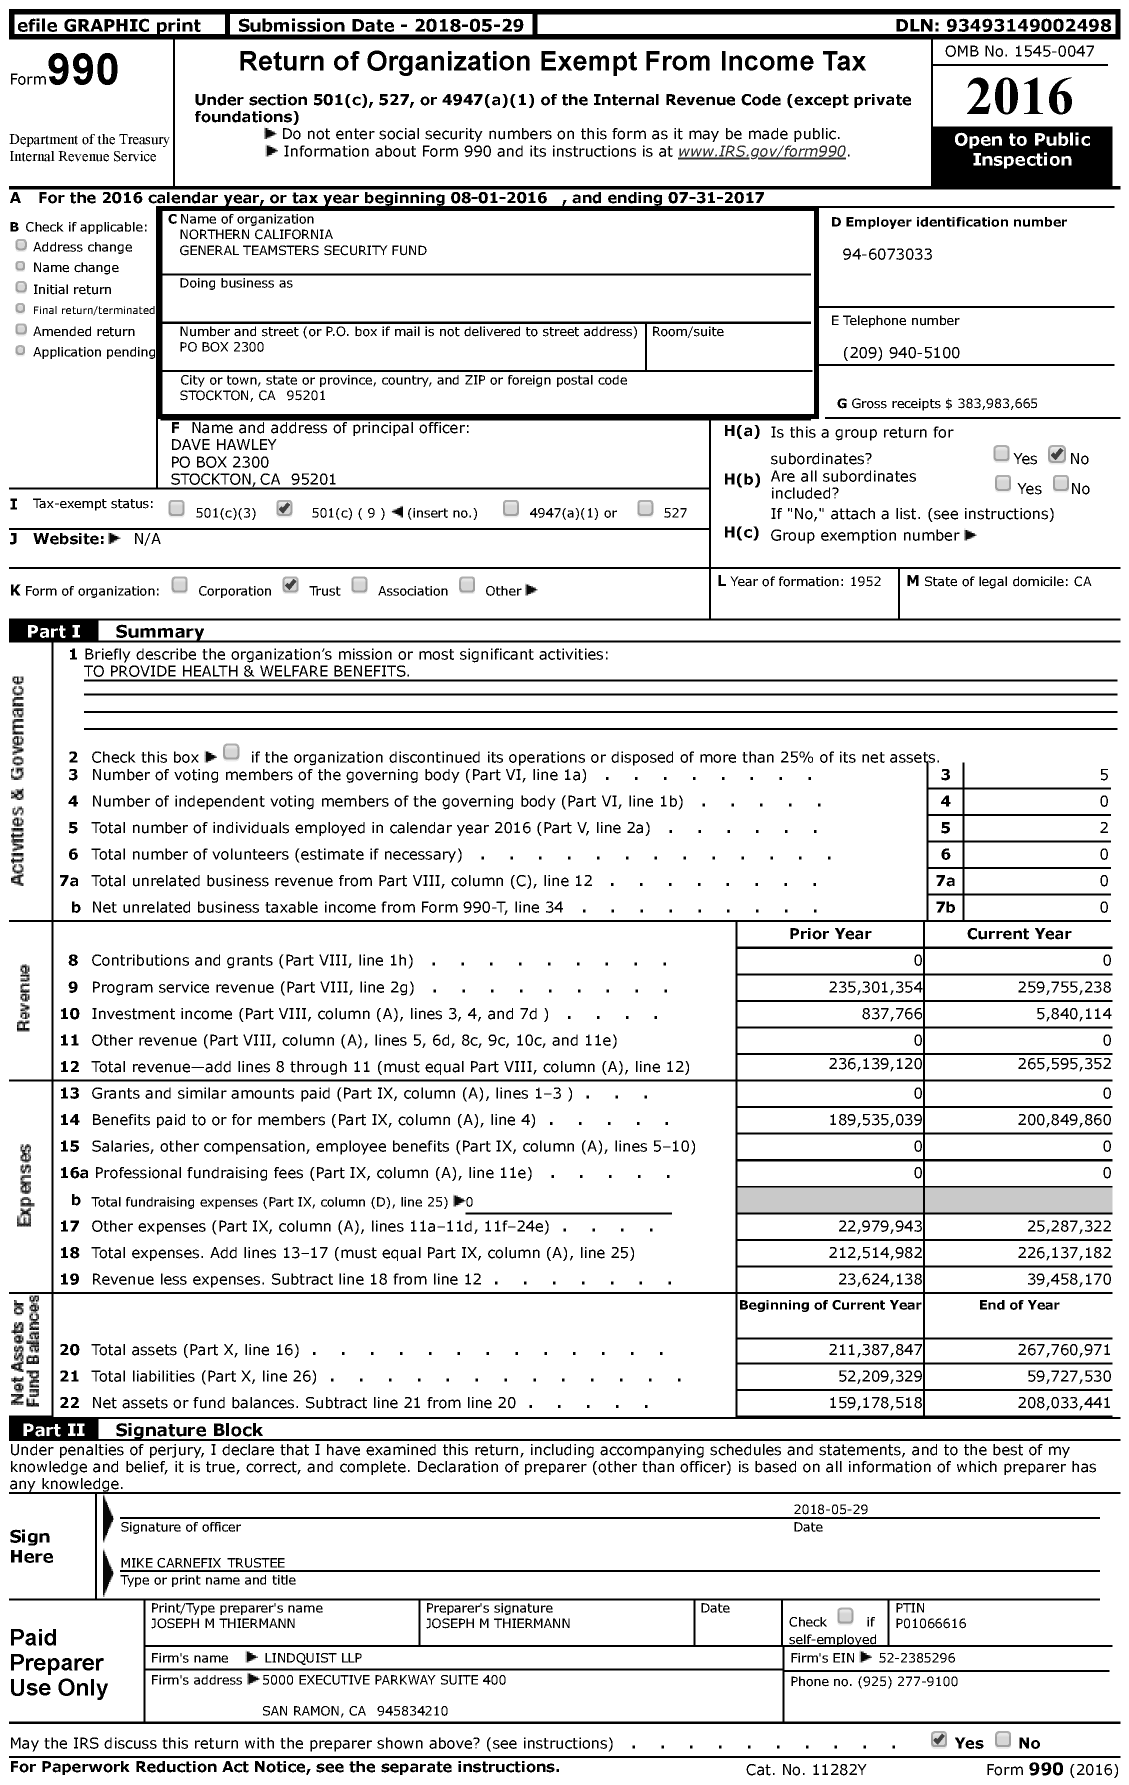 Image of first page of 2016 Form 990 for Northern California General Teamsters Security Fund